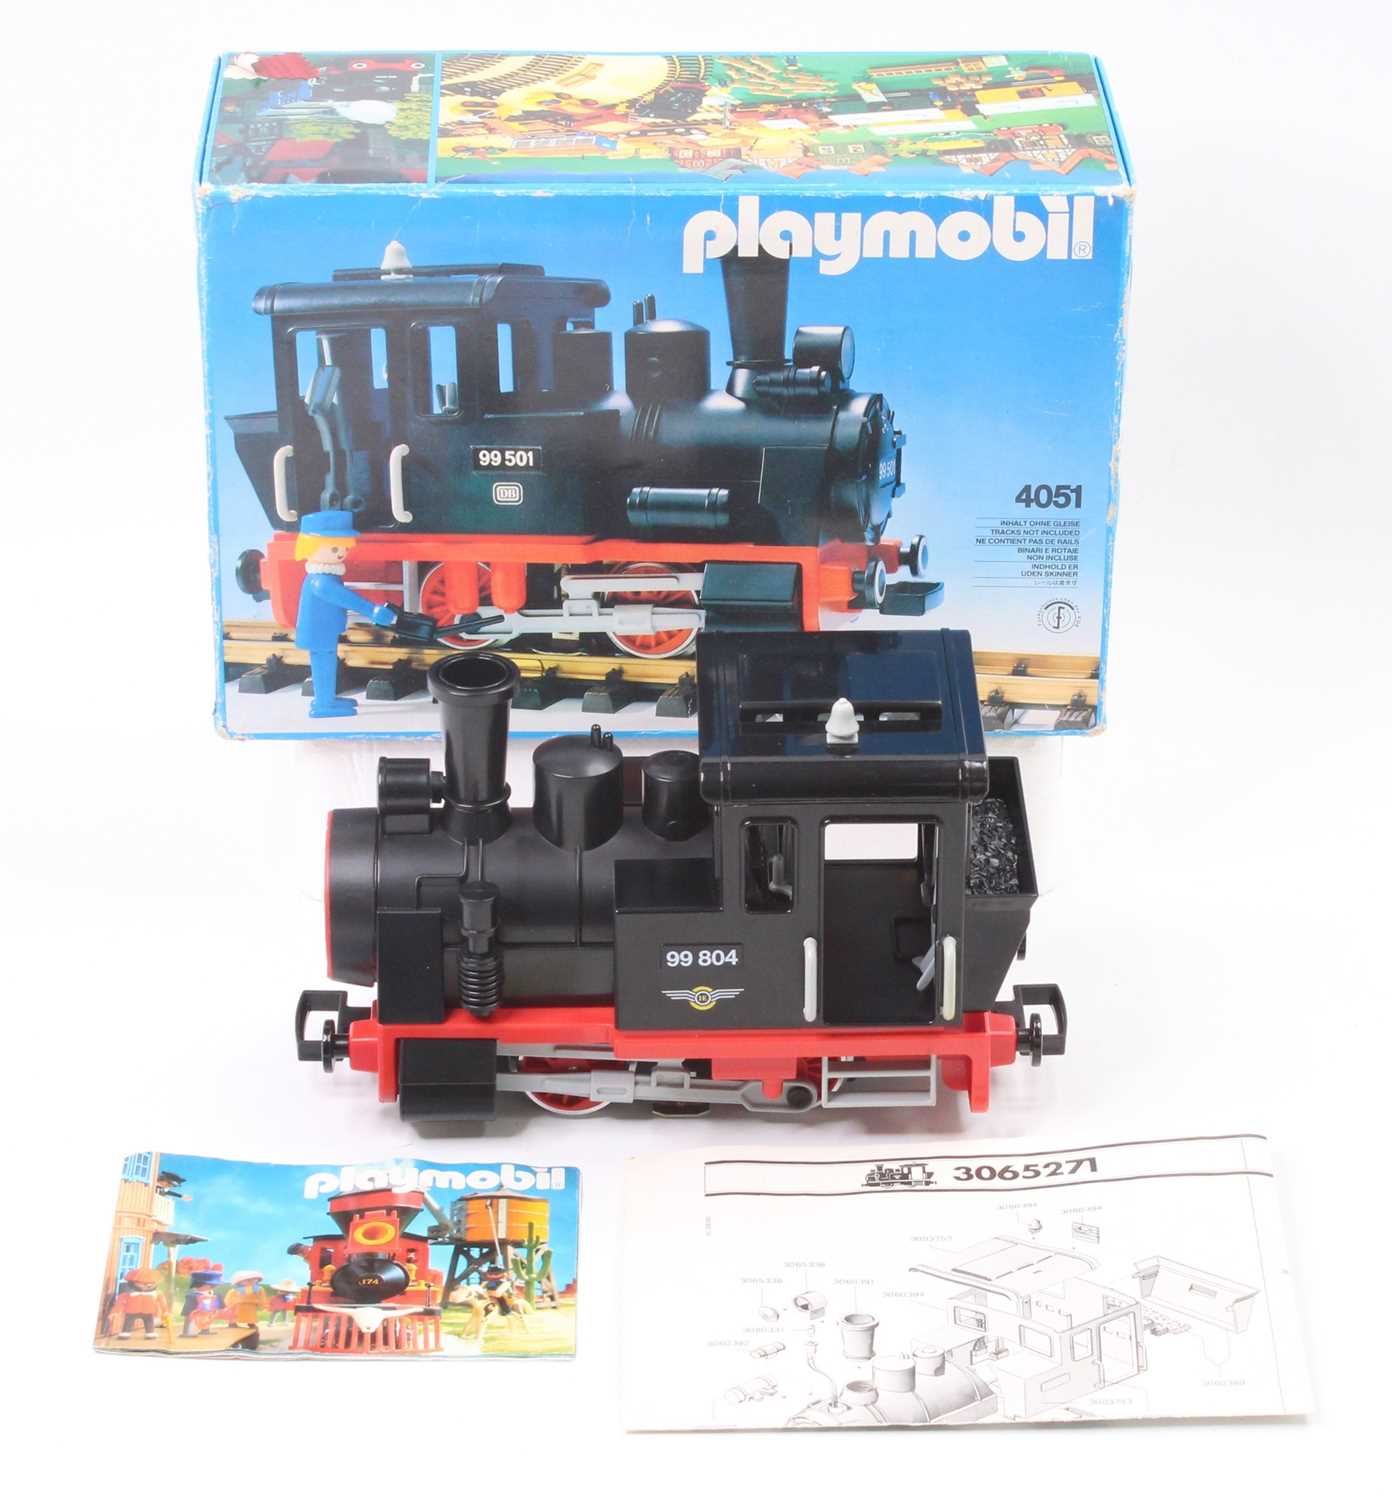 Lot 12 - Vintage Playmobil Train System in Box